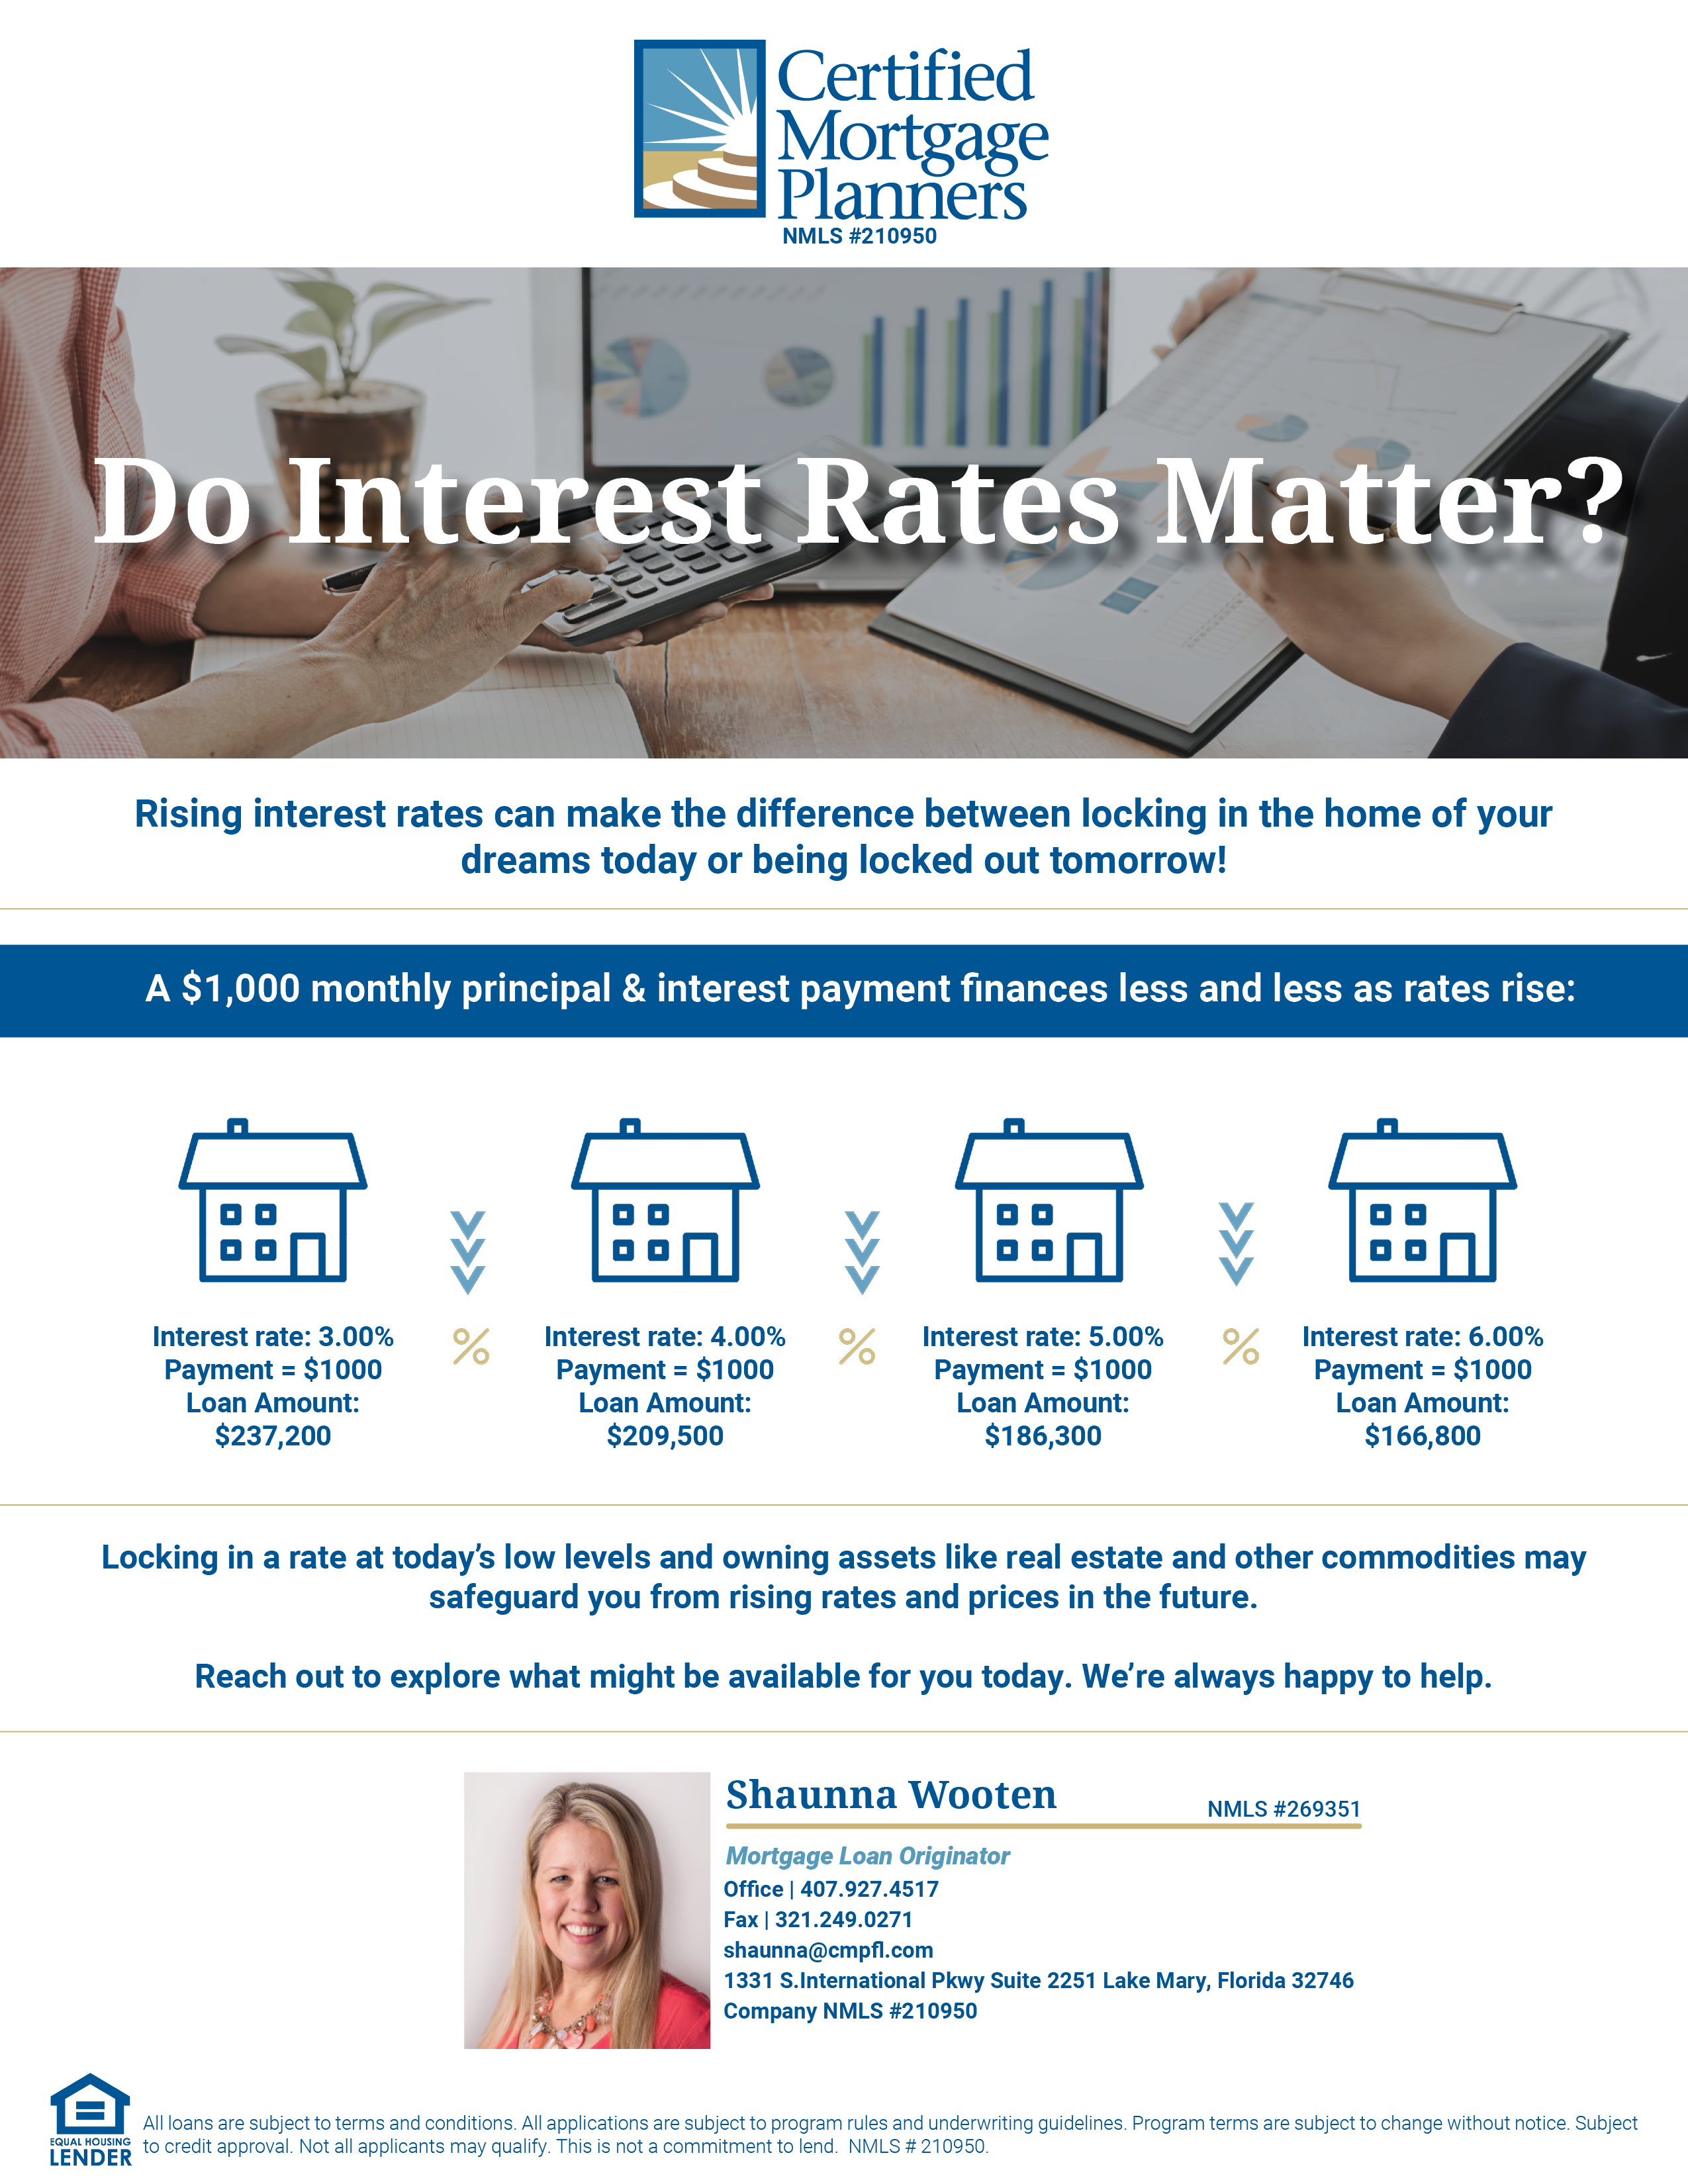 Interest Rate_Shaunna.png